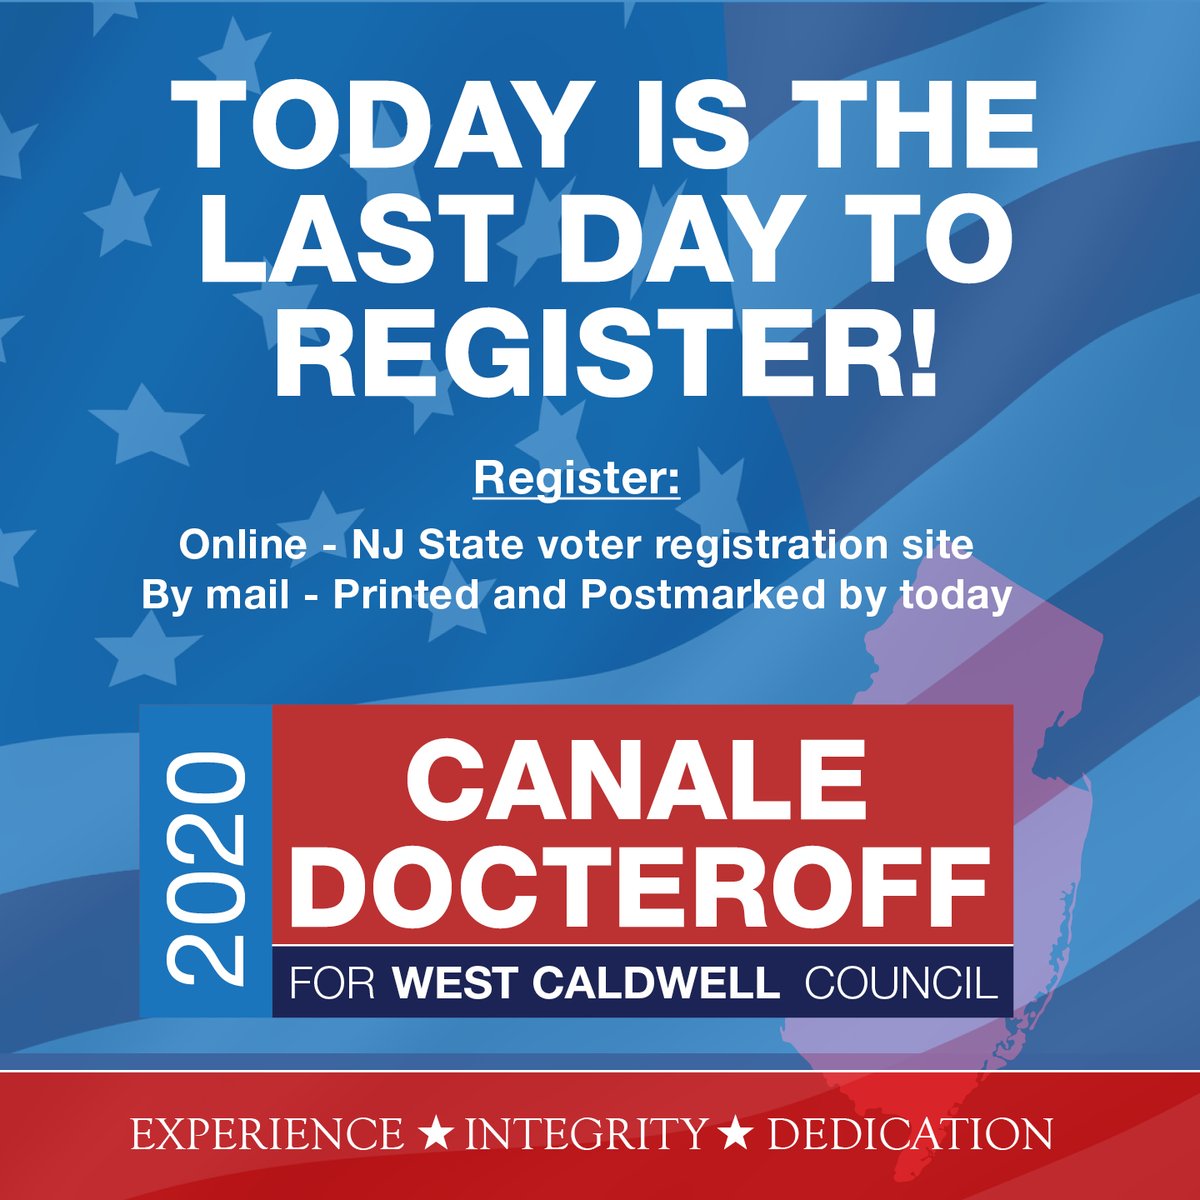 Today is the last day to register to vote! It will take about 10 minutes for your voice to be heard!
🇺🇸🗳
#registertovote2020 #localmattersmost #canaledocteroff2020 #loveourcommunity #westcaldwellnj #westcaldwell #election2020 #vote2020 #registertovote #caldwellnj #westessex